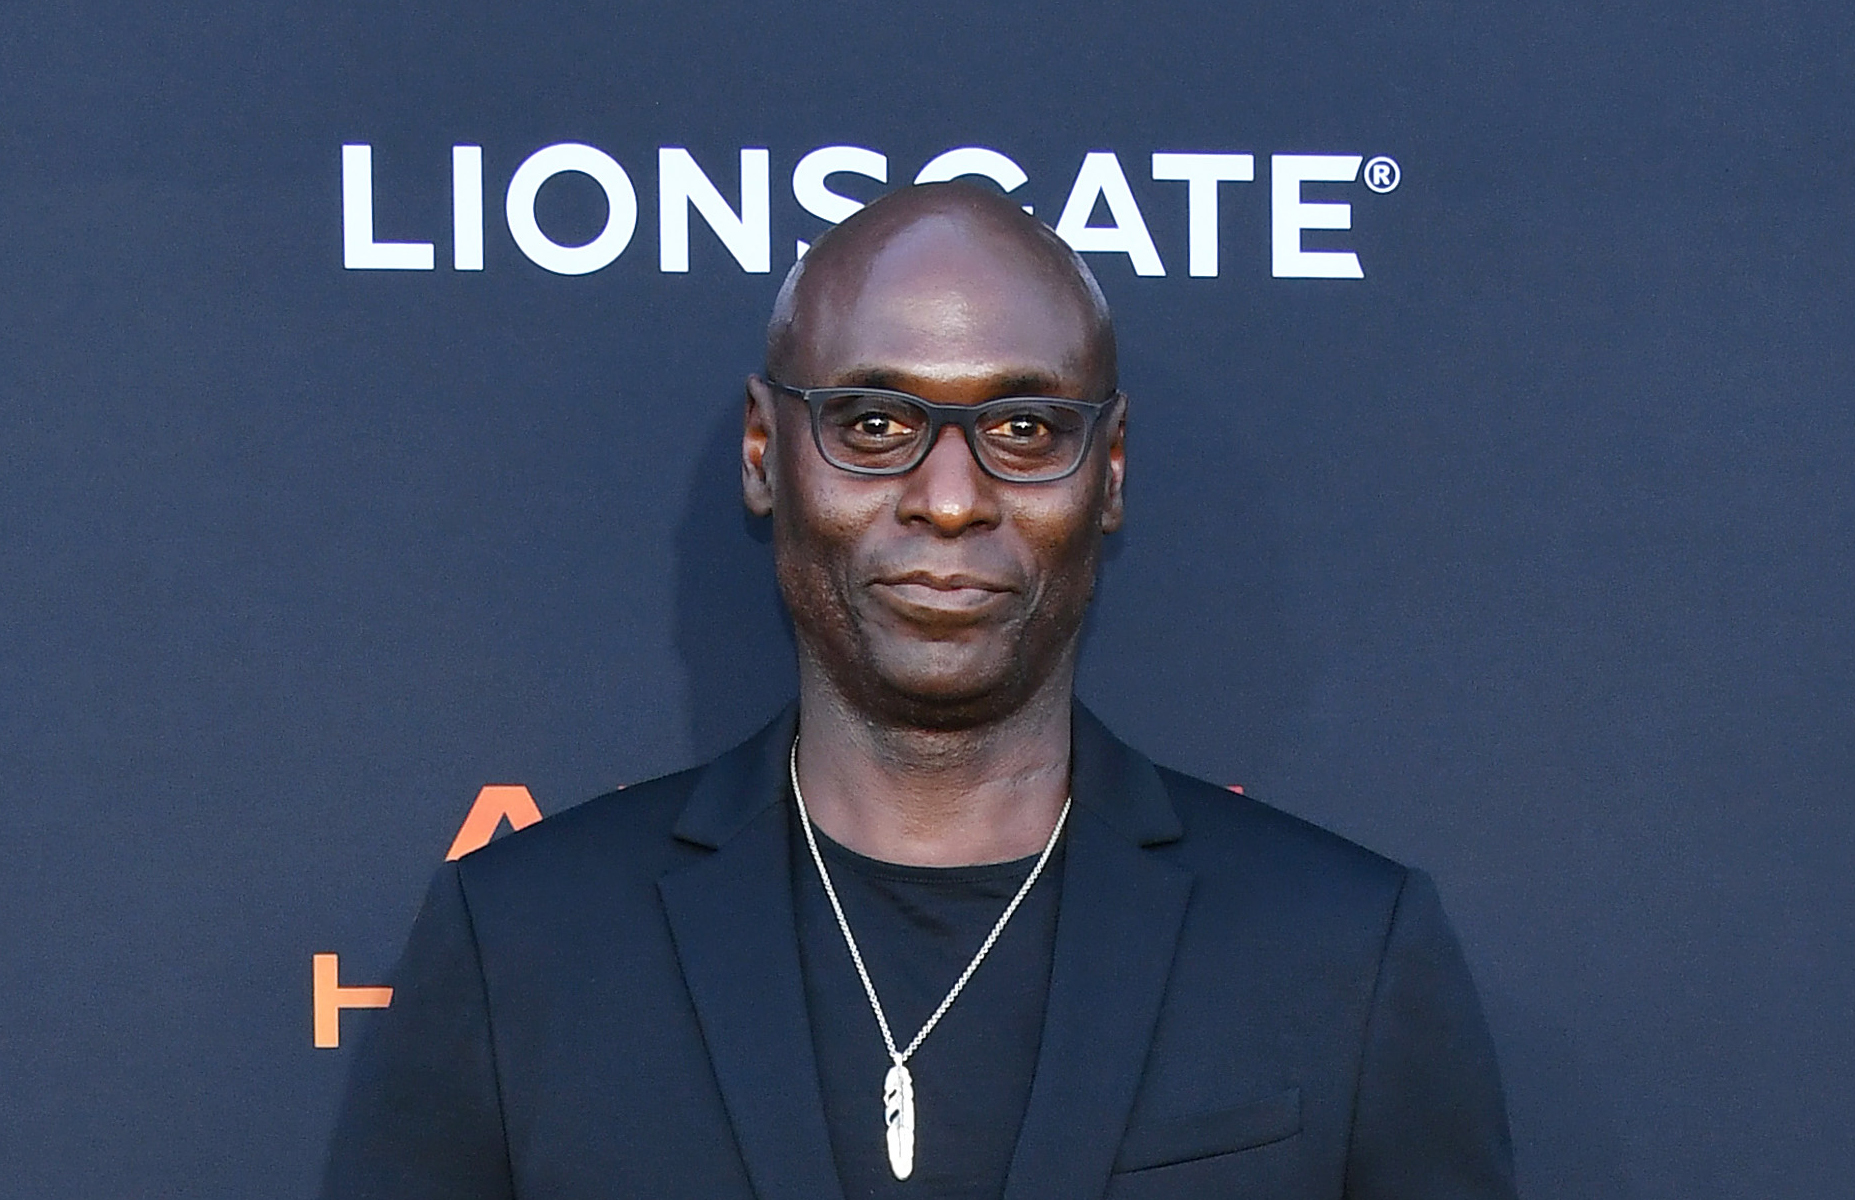 Lance Reddick, Star of 'The Wire' and 'John Wick,' Dies at 60